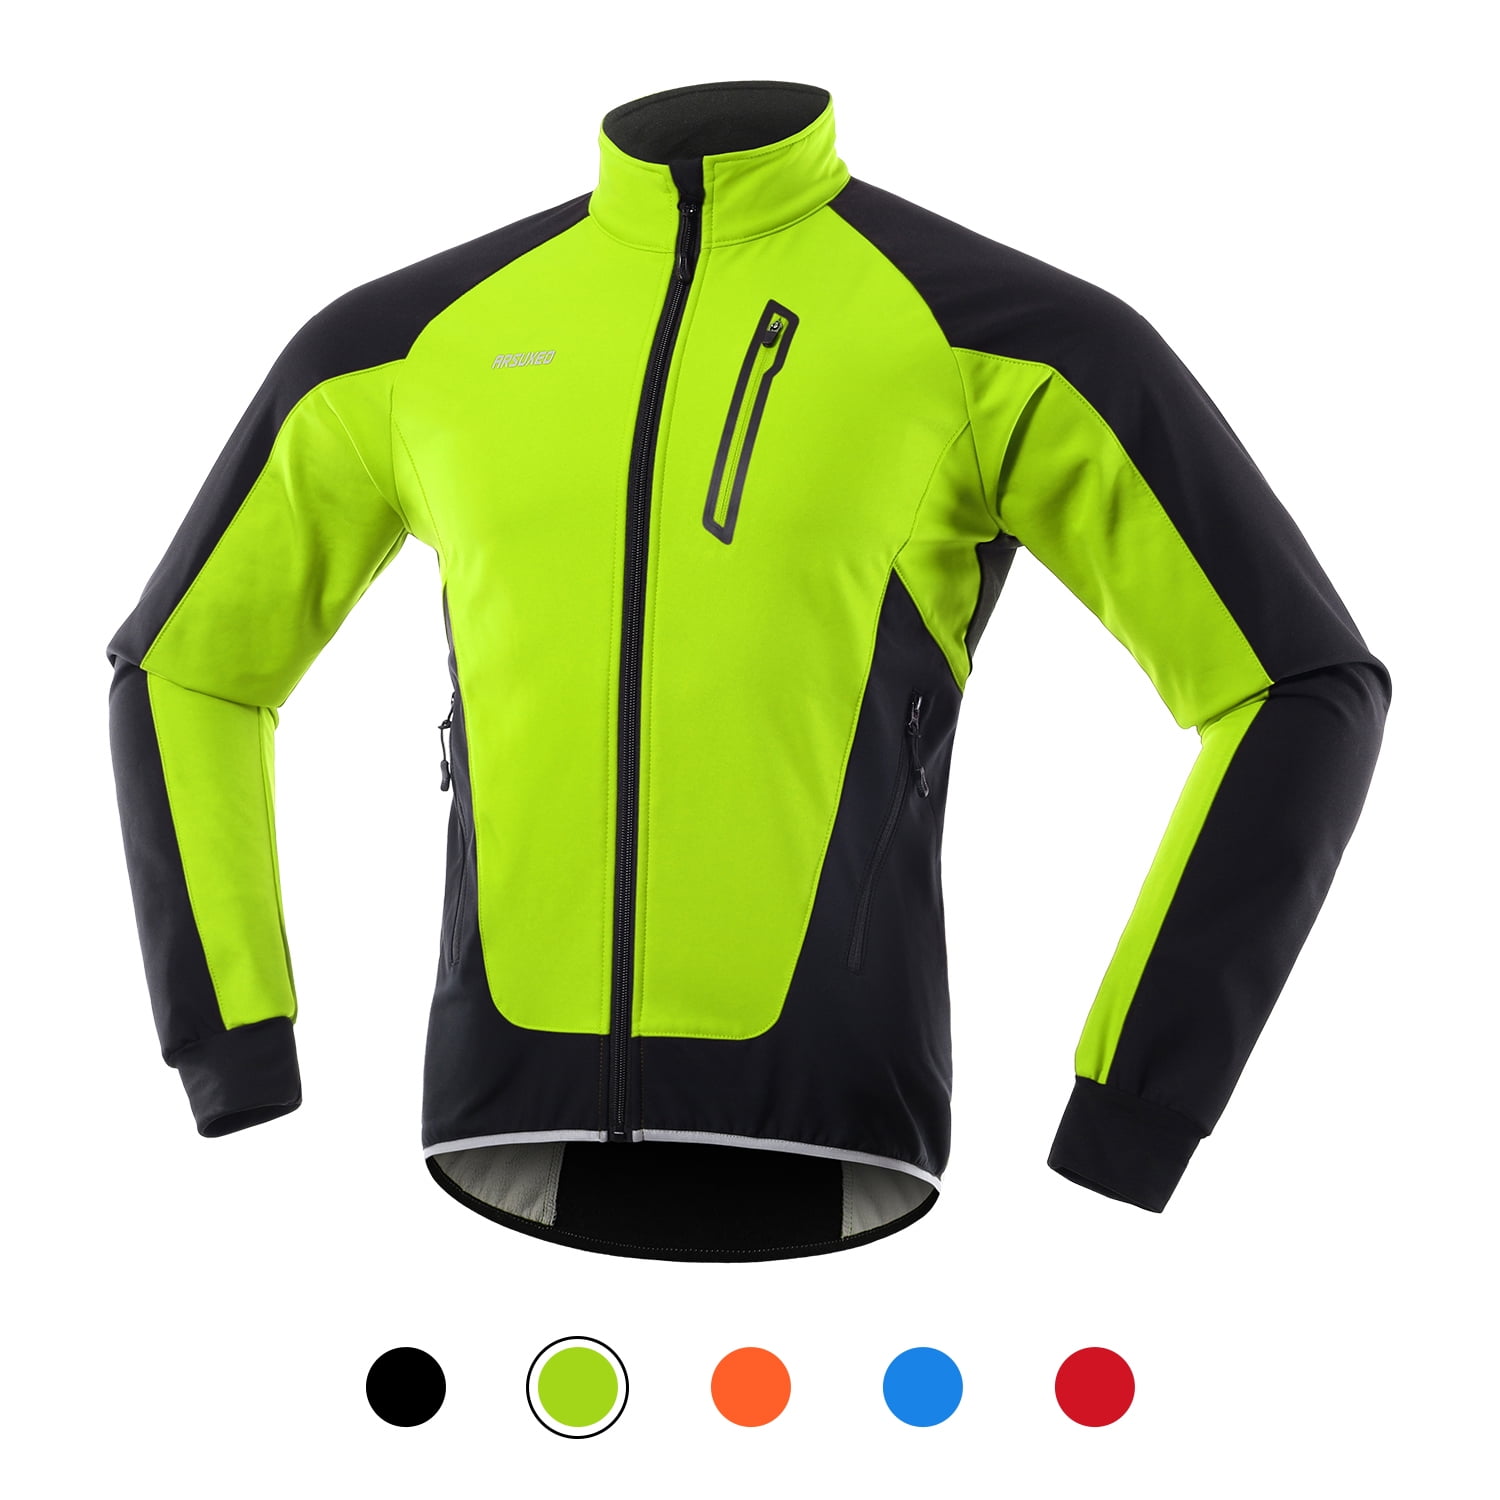 Mens Cycling Jacket Lightweight Fleece Cycling Coat Keep Warm Reflective for Motorbike Racing Riding,Red,S